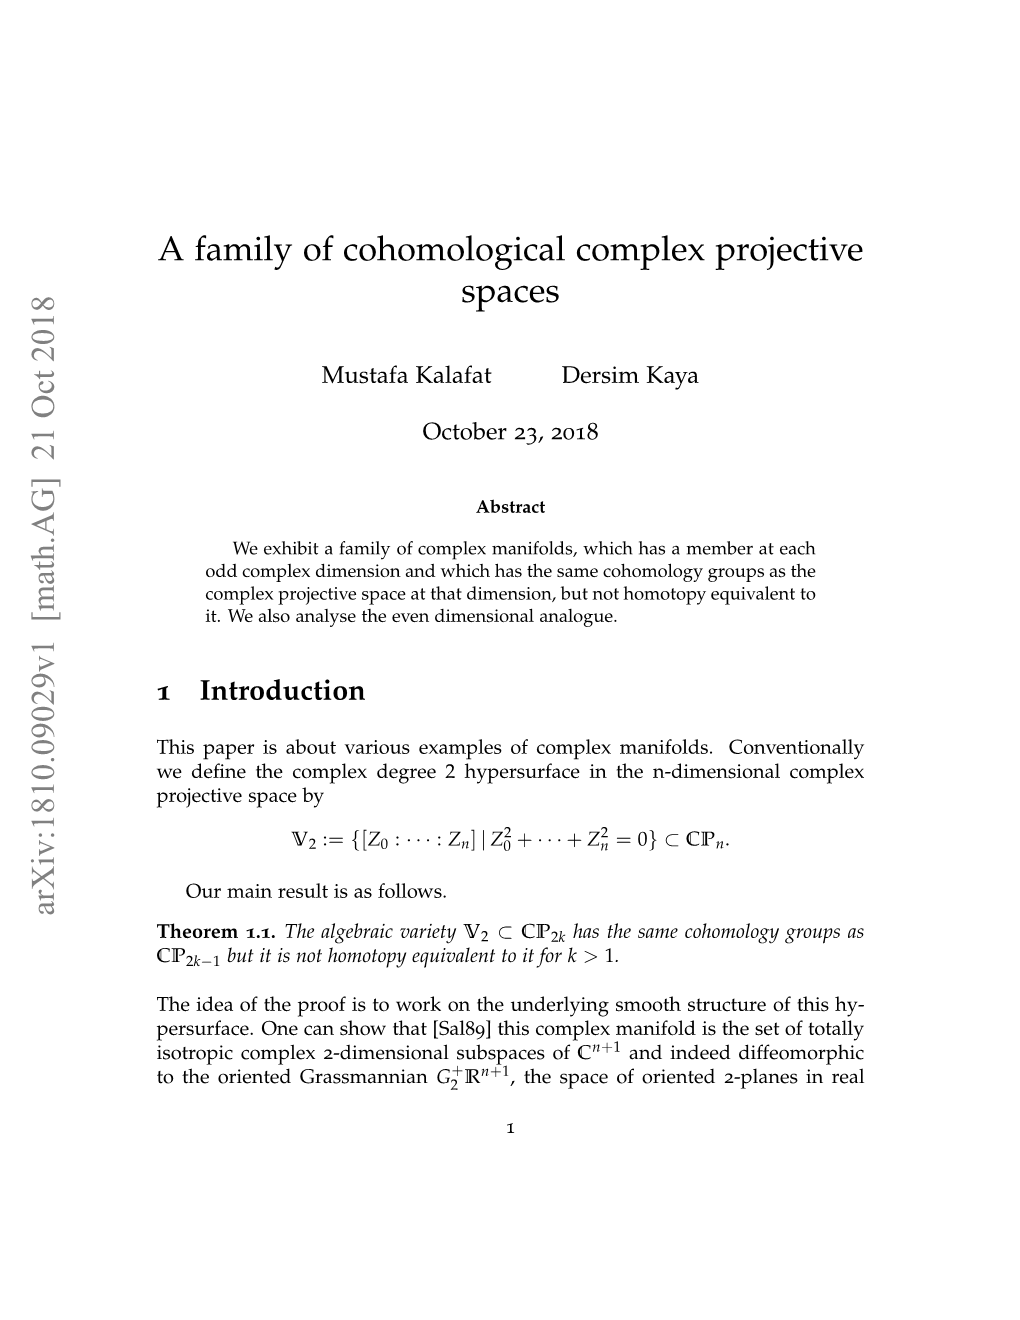 A Family of Cohomological Complex Projective Spaces